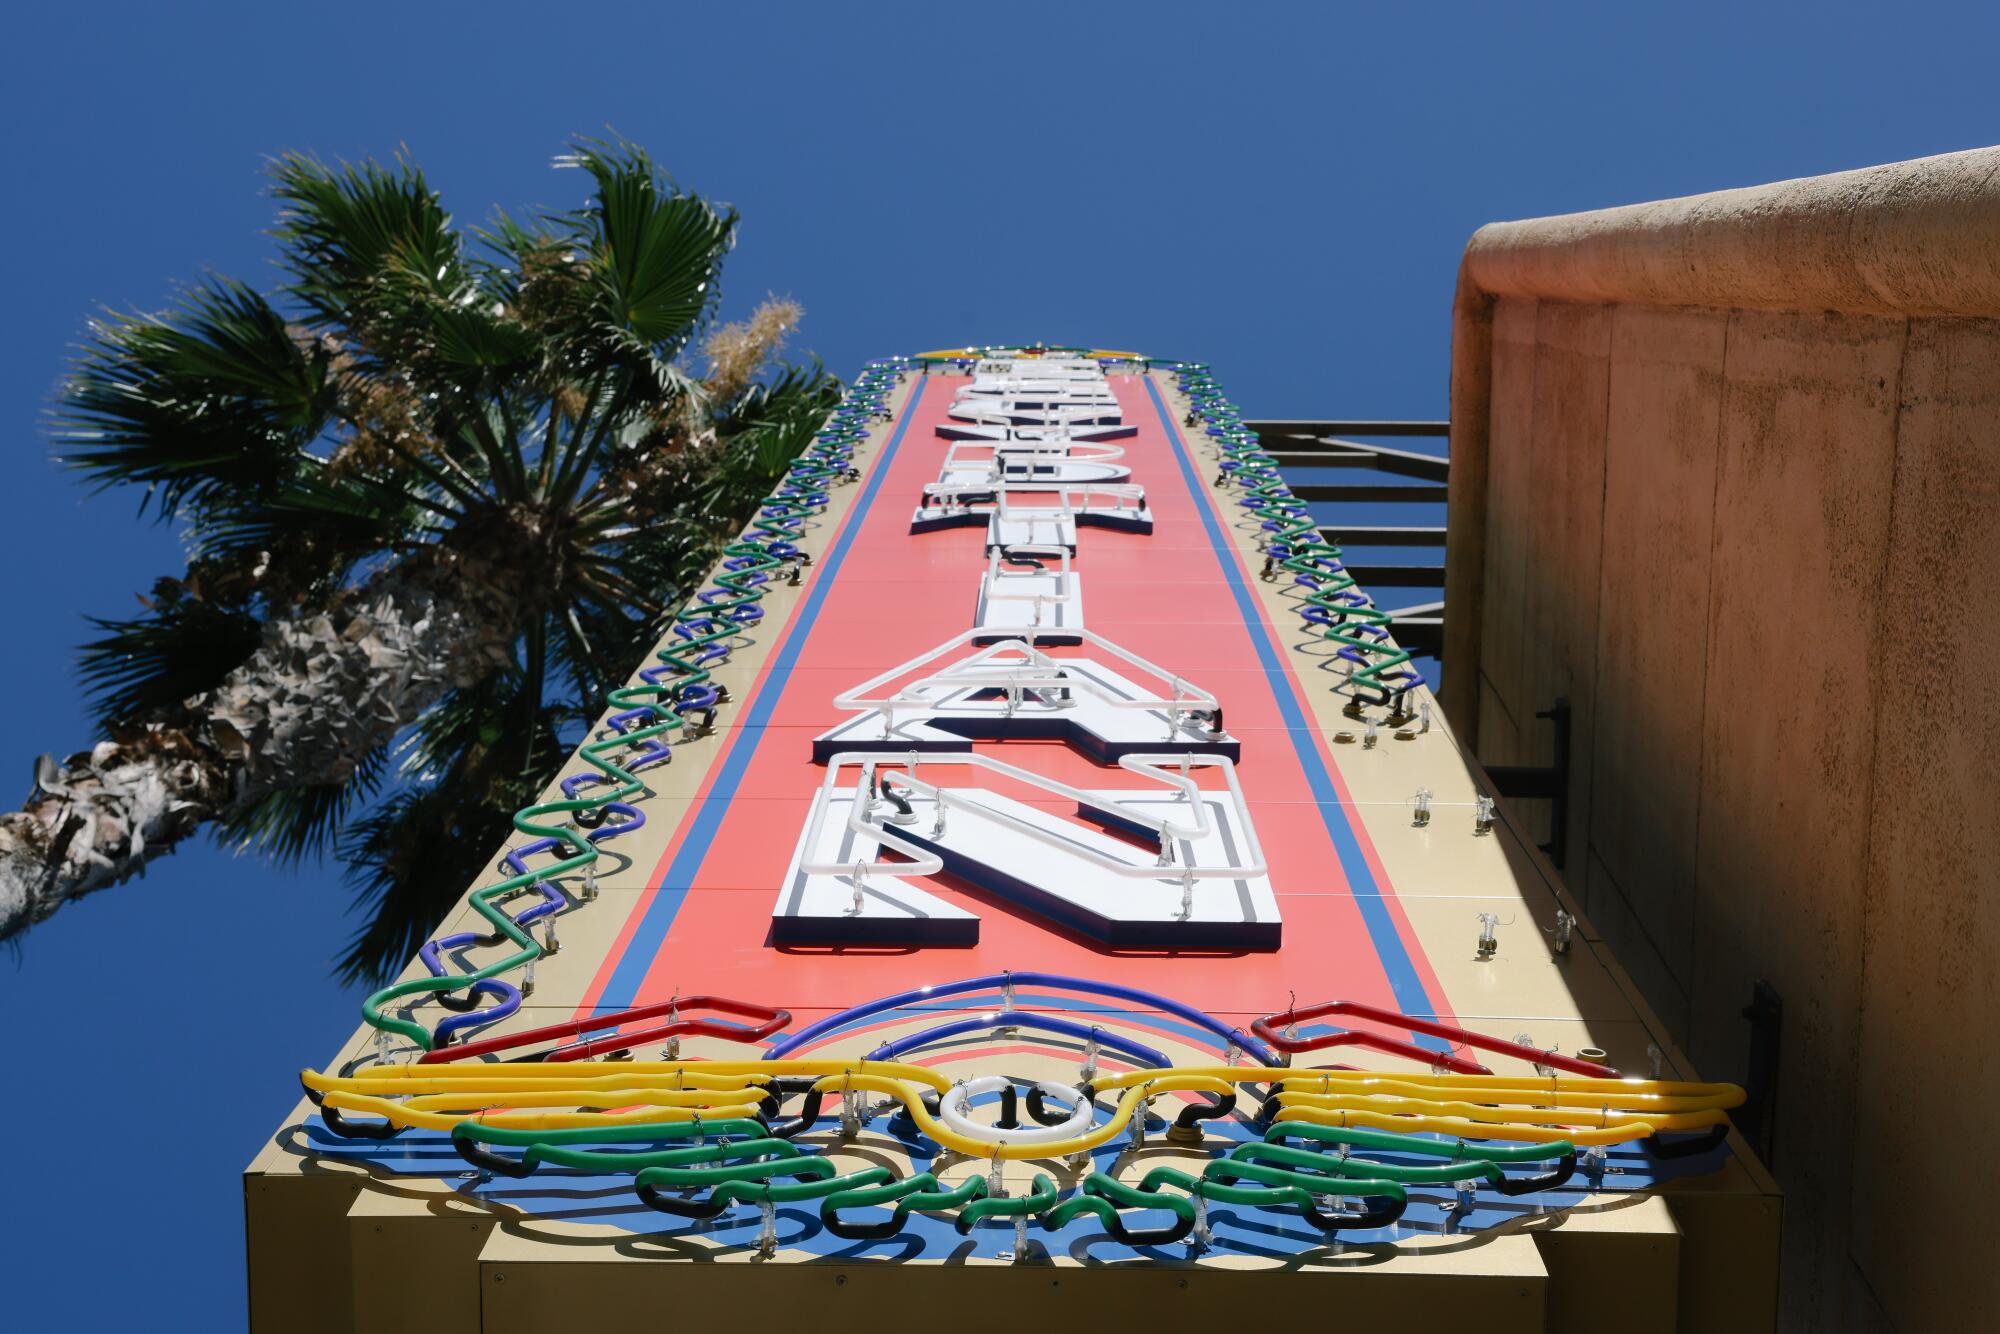 The Egyptian Theatre's neon blade sign has been restored.